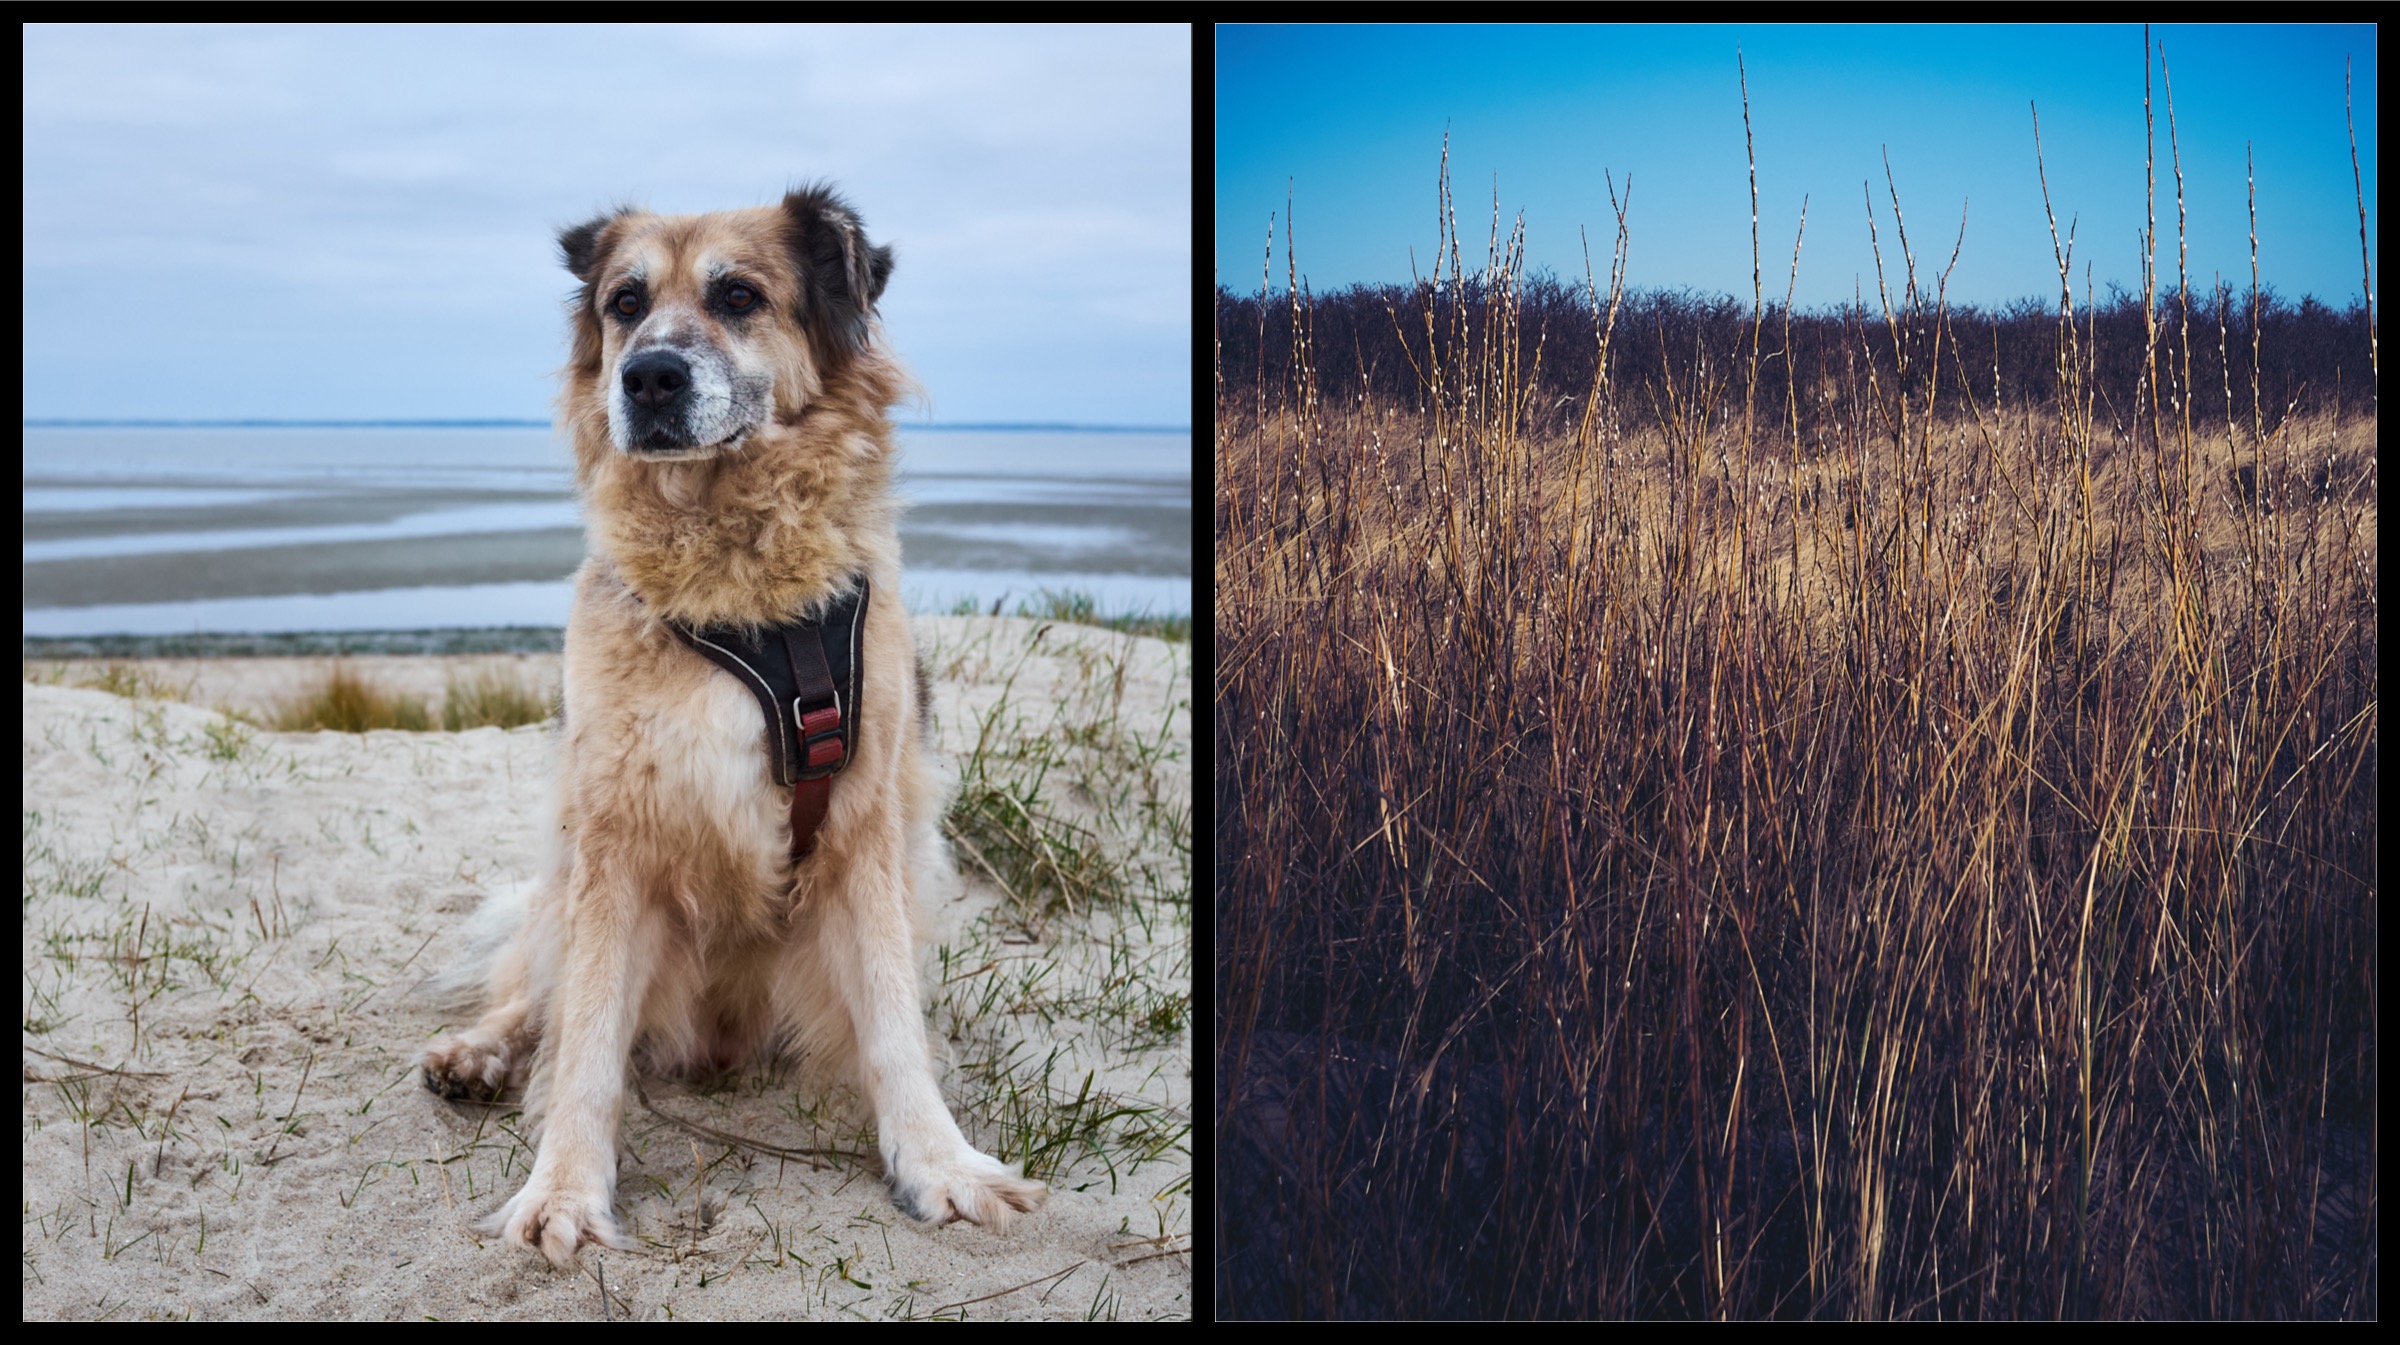 Diptych of a shepherd mix dog waiting on a dune, and budding willow branches on a dune, one year later.